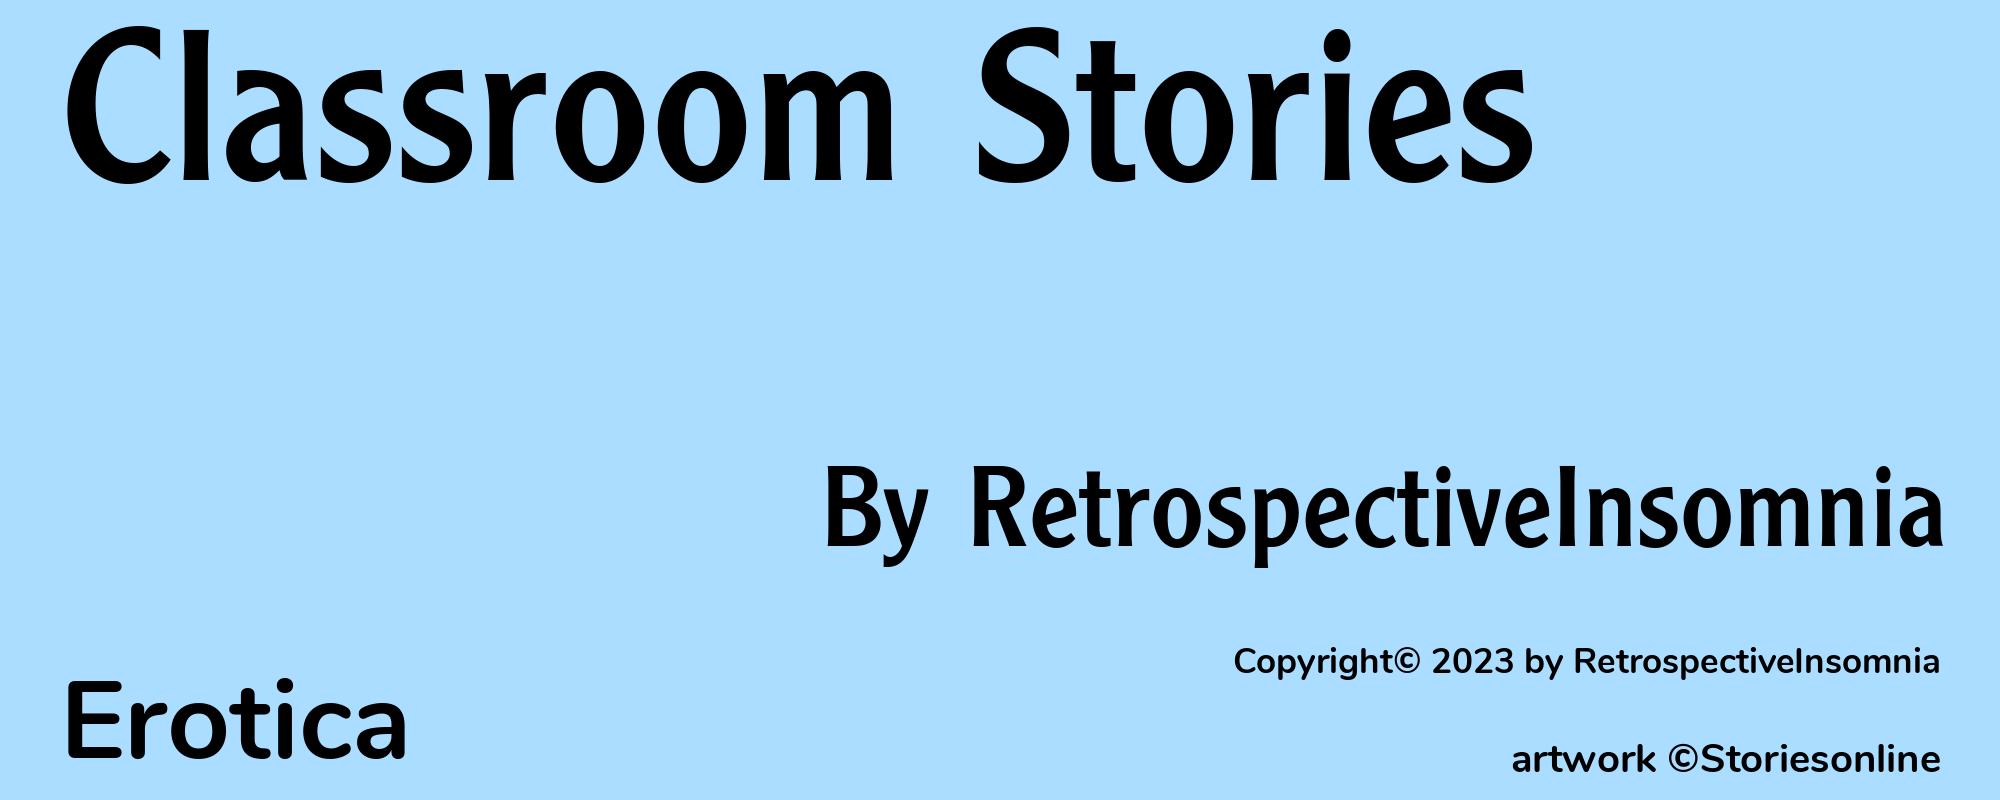 Classroom Stories - Cover